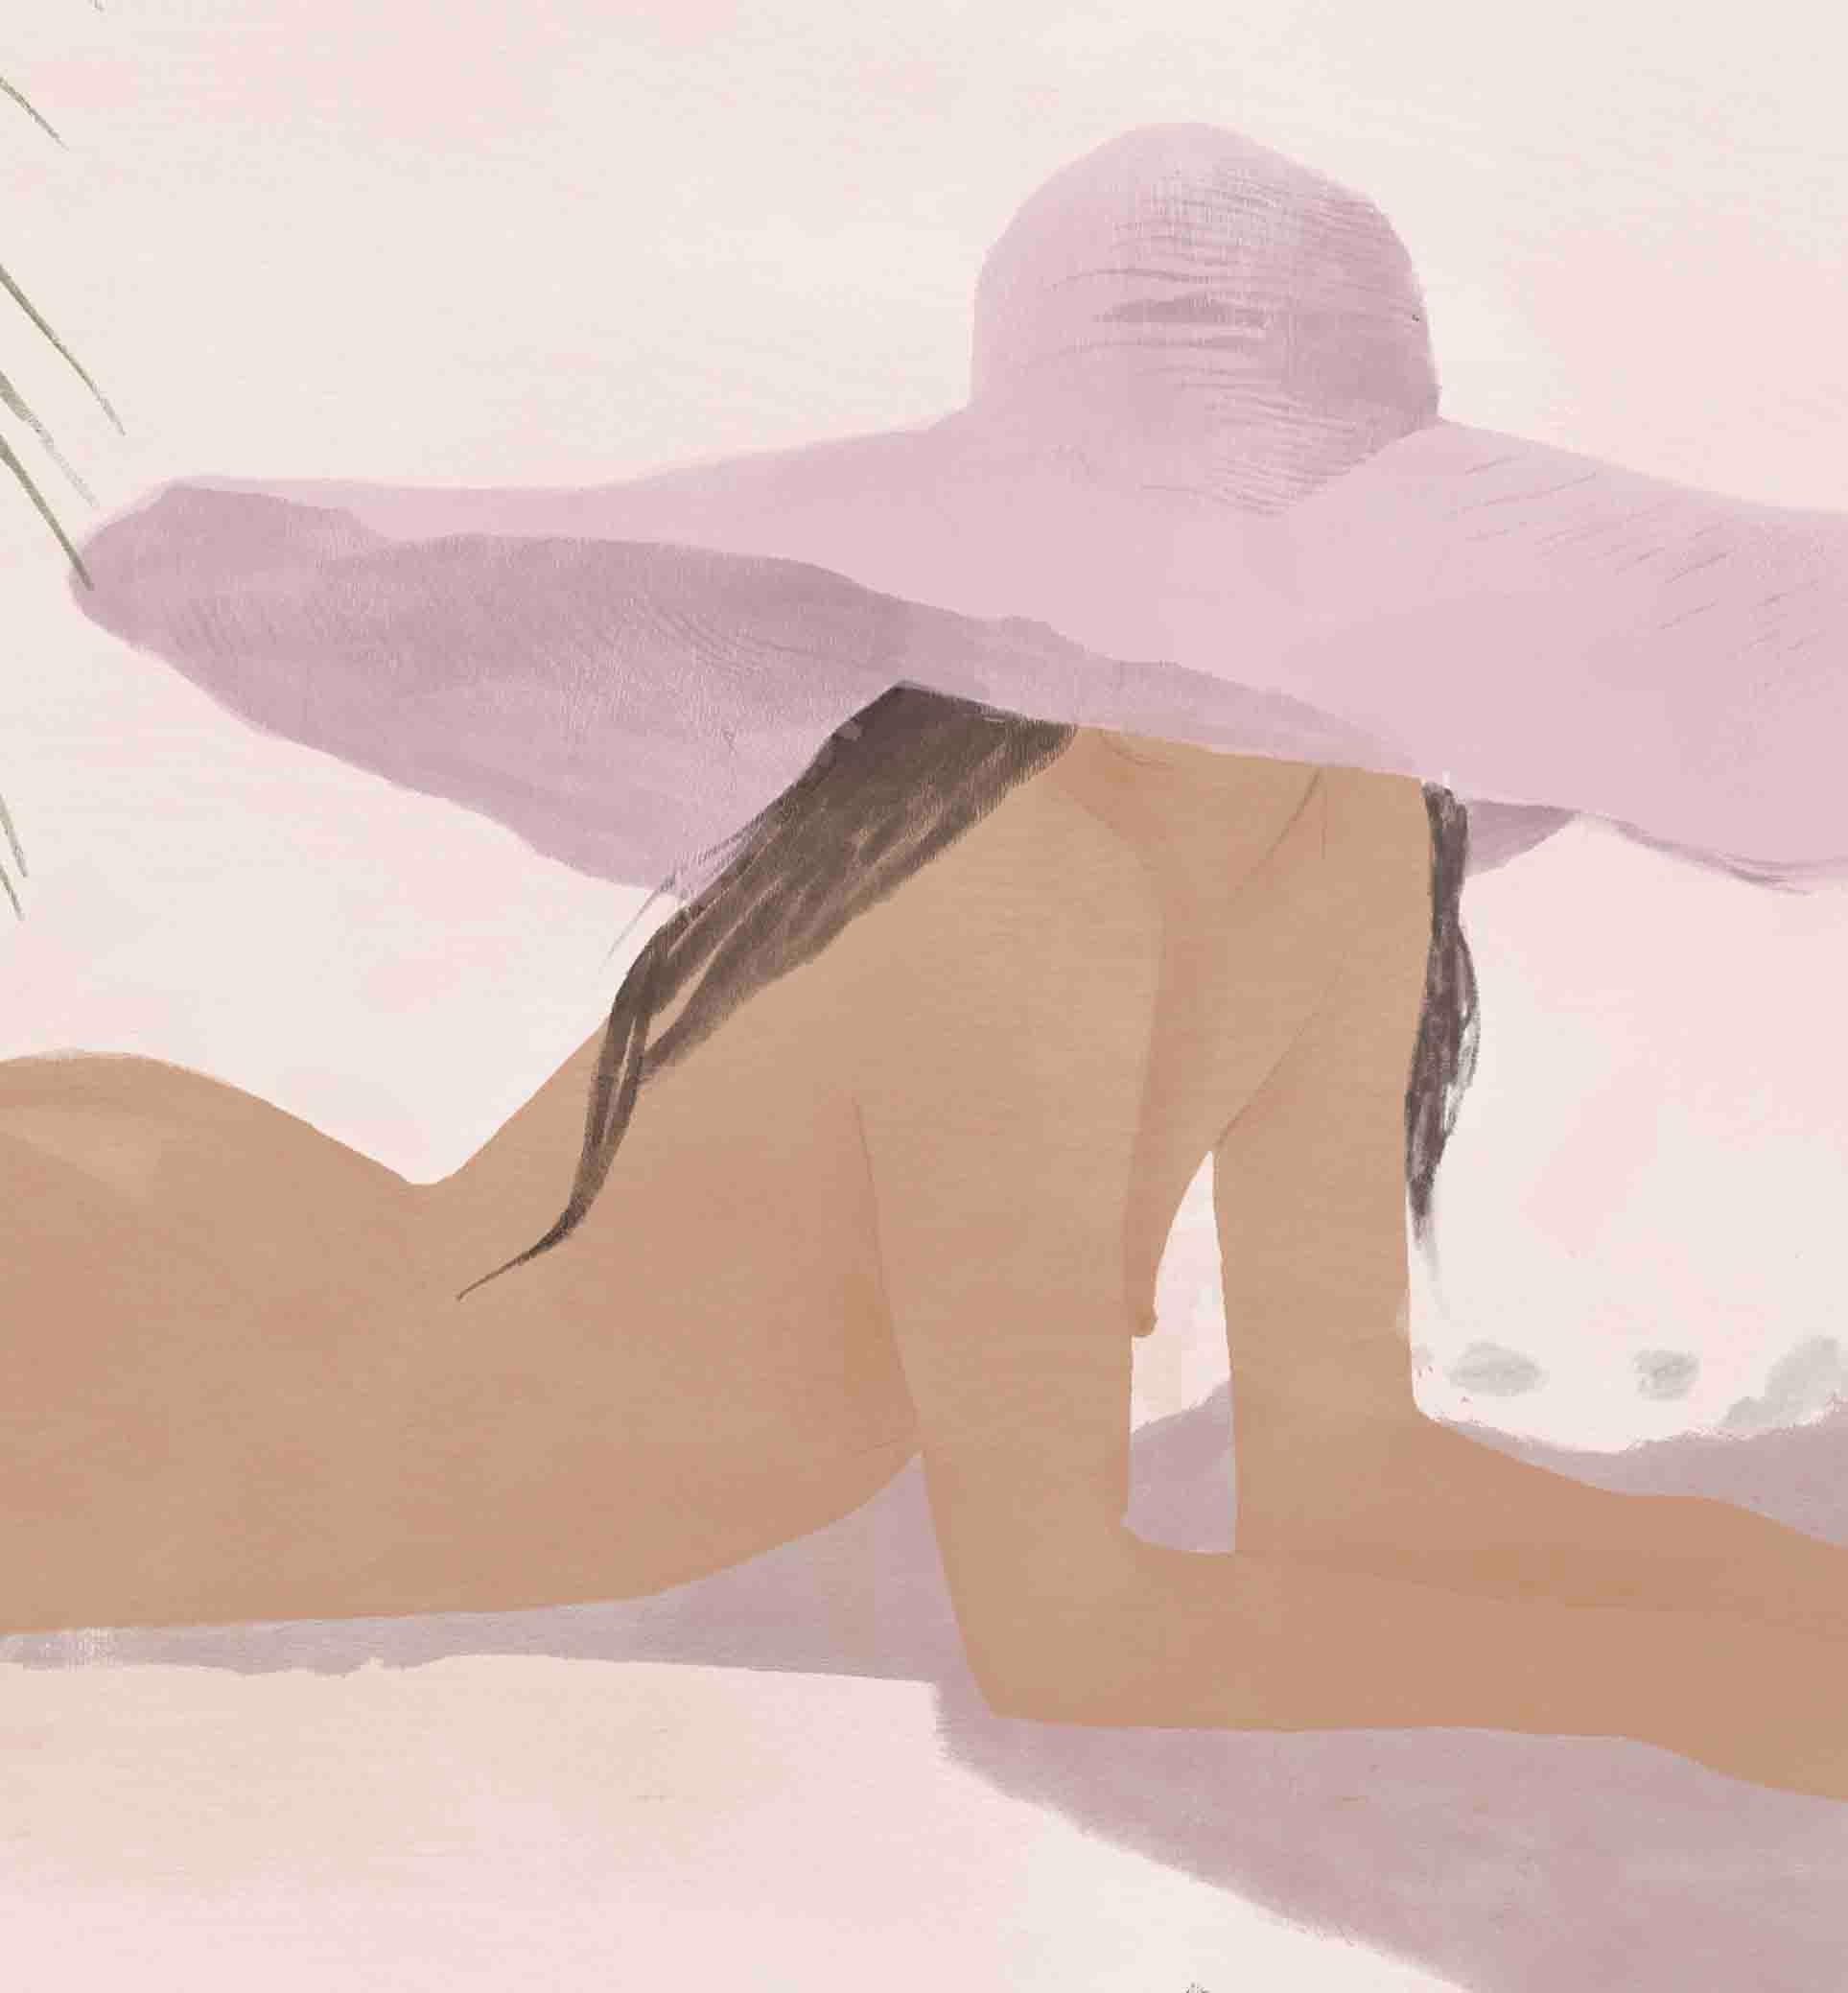 Tati Soko 
Girl from Ipanema, 2020
16 x 19 inches // 40 x 48 cms
Edition of 7
Digital Art On Archival cotton paper
Limited edition print

Experience the epitome of sun-kissed serenity with 